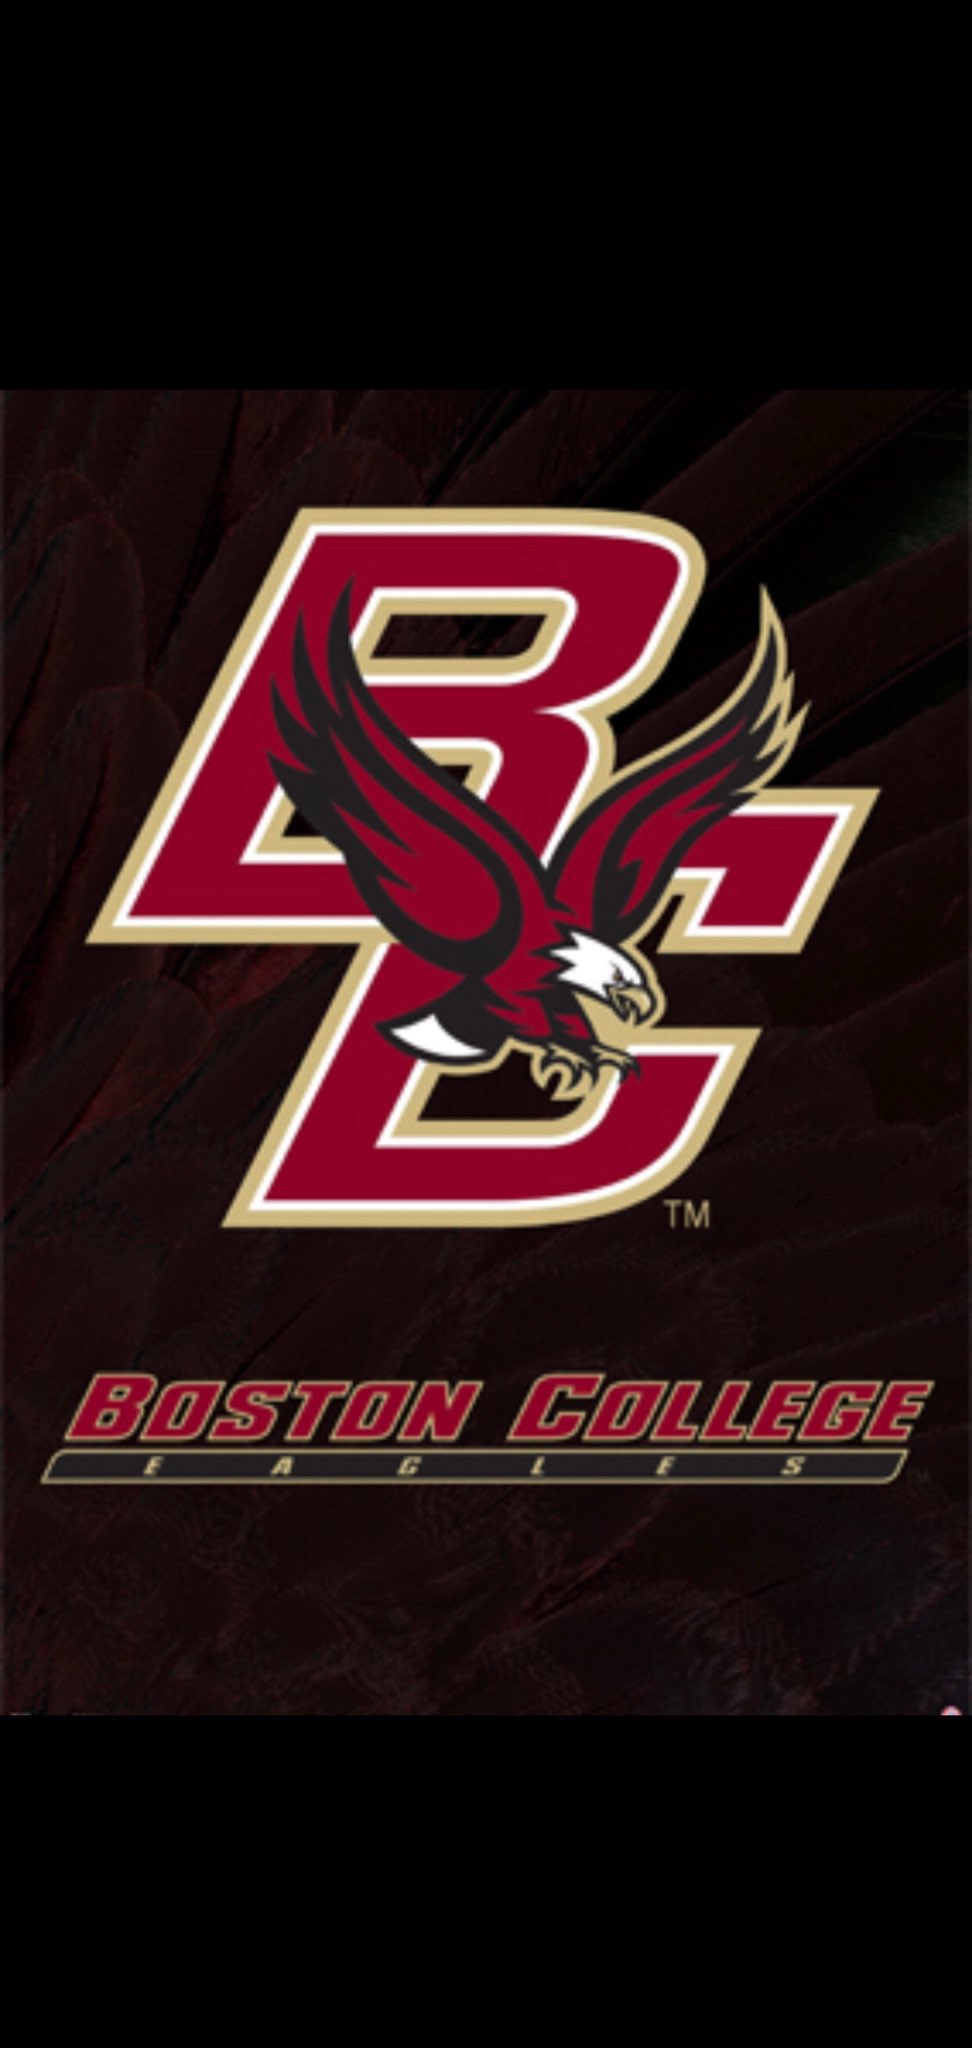 Andrew messineo on thrilled and honored to announce that i have received a division offer from boston college bccoachjake bccoachaddazio joesuilivan httpstcoaytojszt